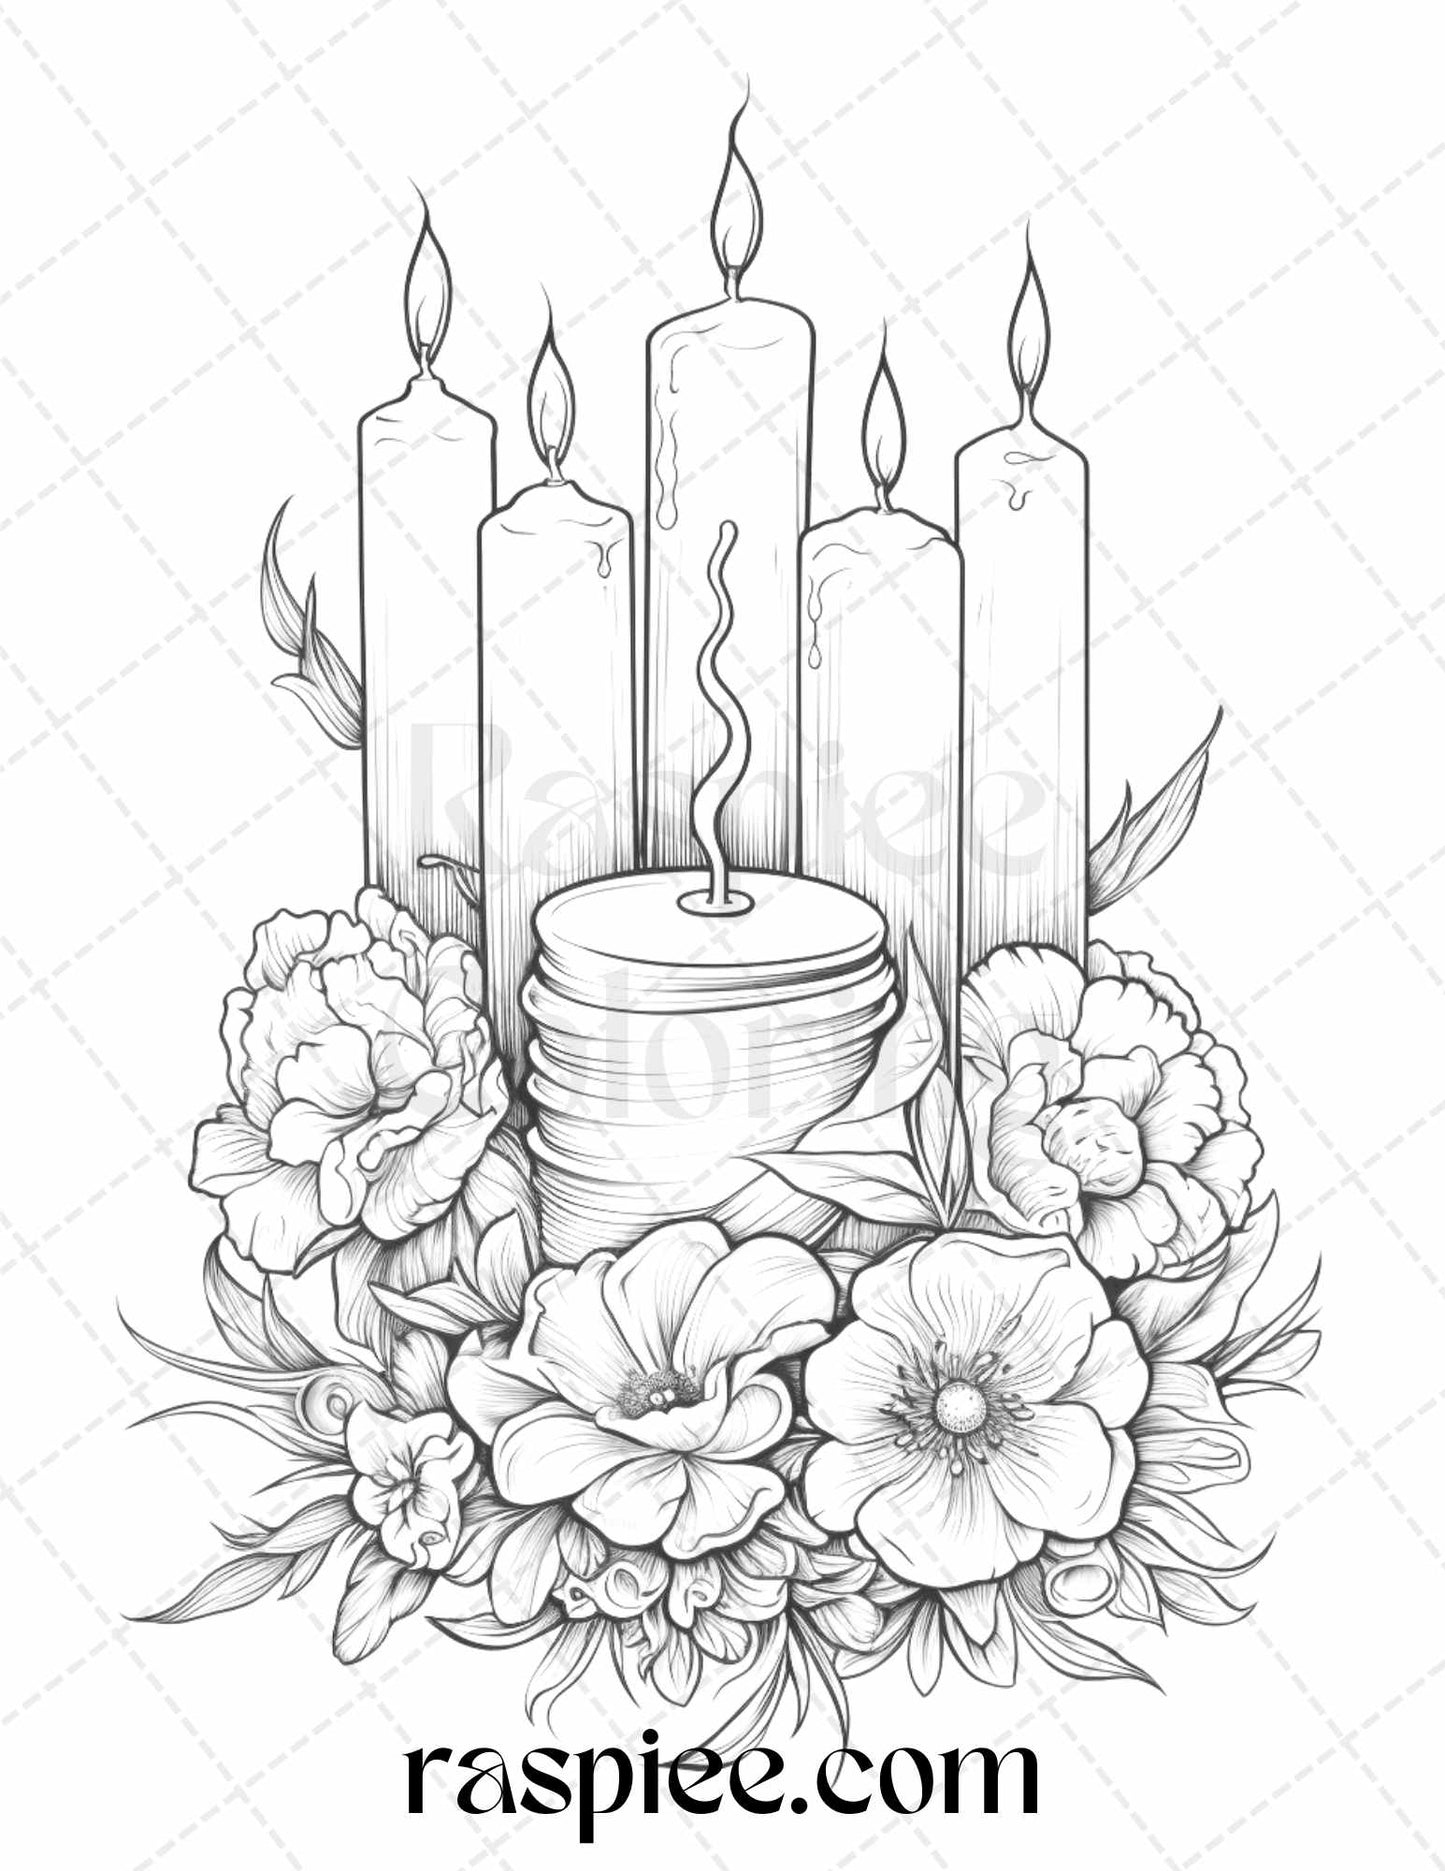 flower candles grayscale coloring pages, printable coloring book for adults, instant download grayscale art, DIY adult coloring, black and white floral coloring, candle drawings for relaxation